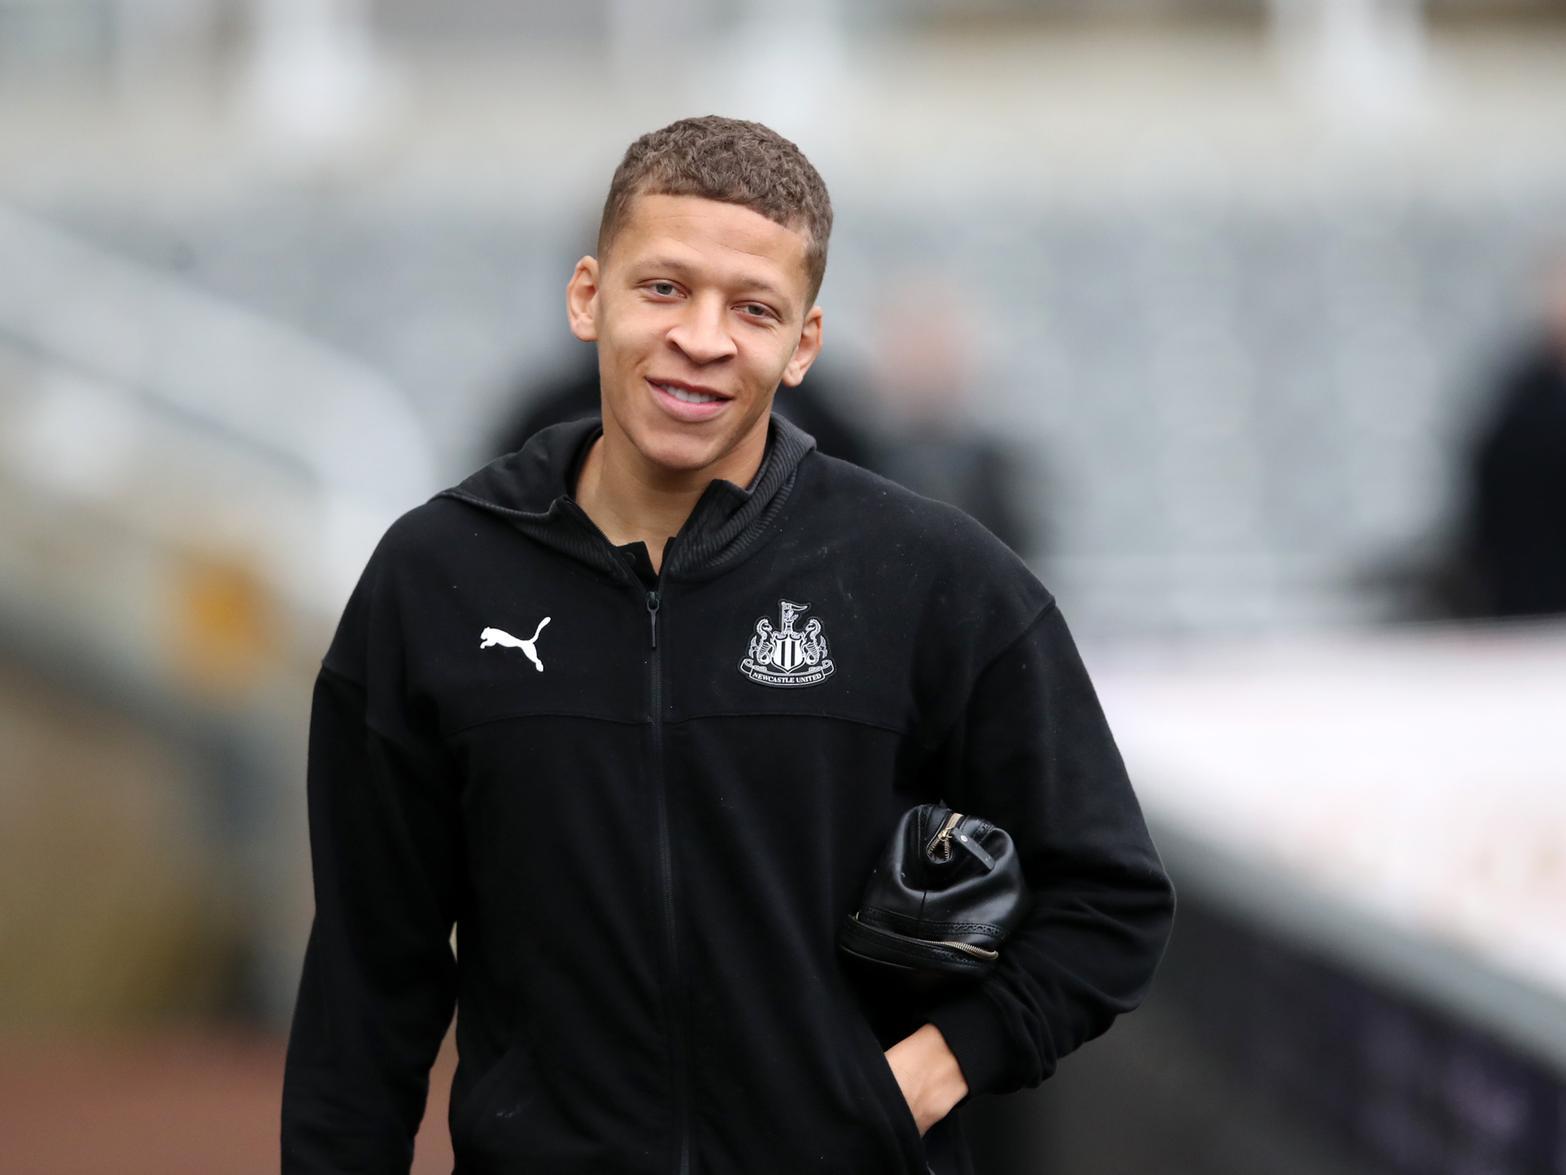 Newcastle United are set to offer Dwight Gayle to Championship sides on a loan basis, in a deal that would be no risk, with clubs only committing to a permanent deal of 20m if they are promoted. (The Telegraph)